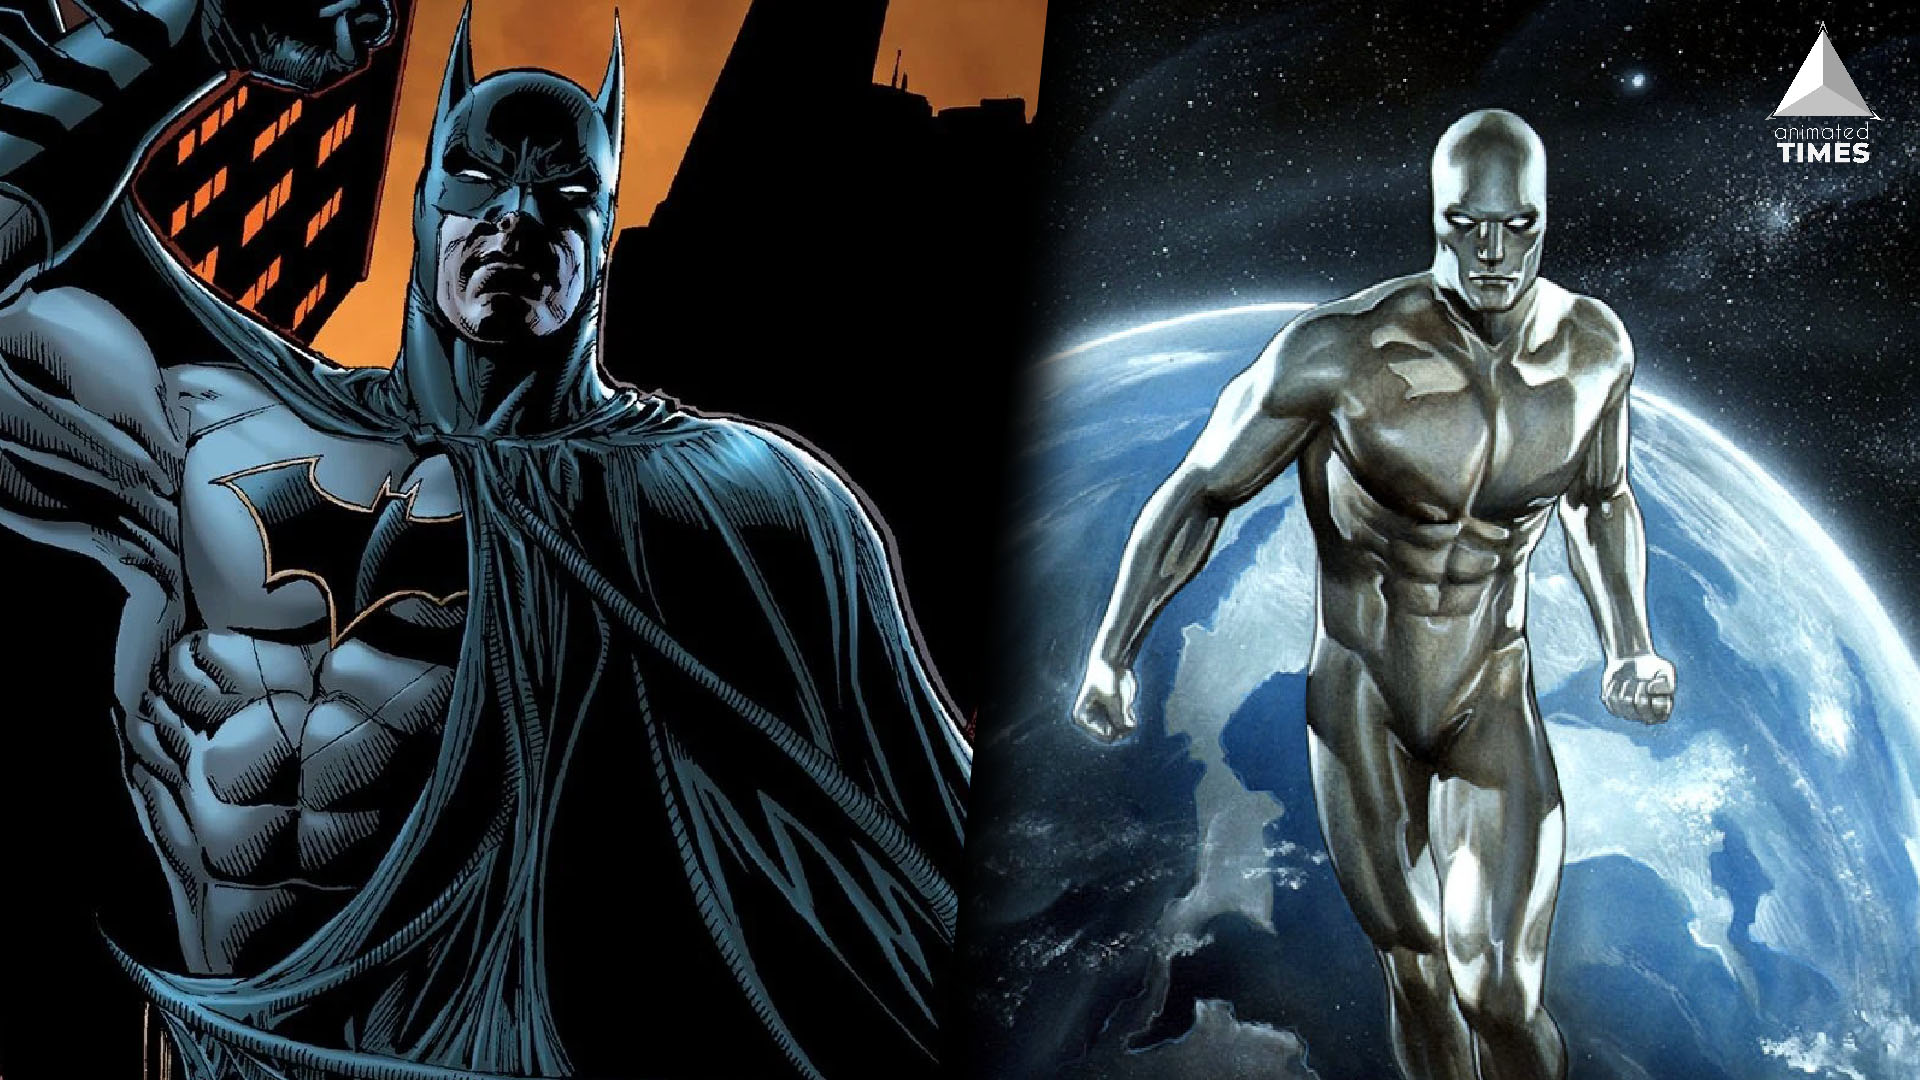 DC’s New Superhero Fusion of Batman and Silver Surfer!!